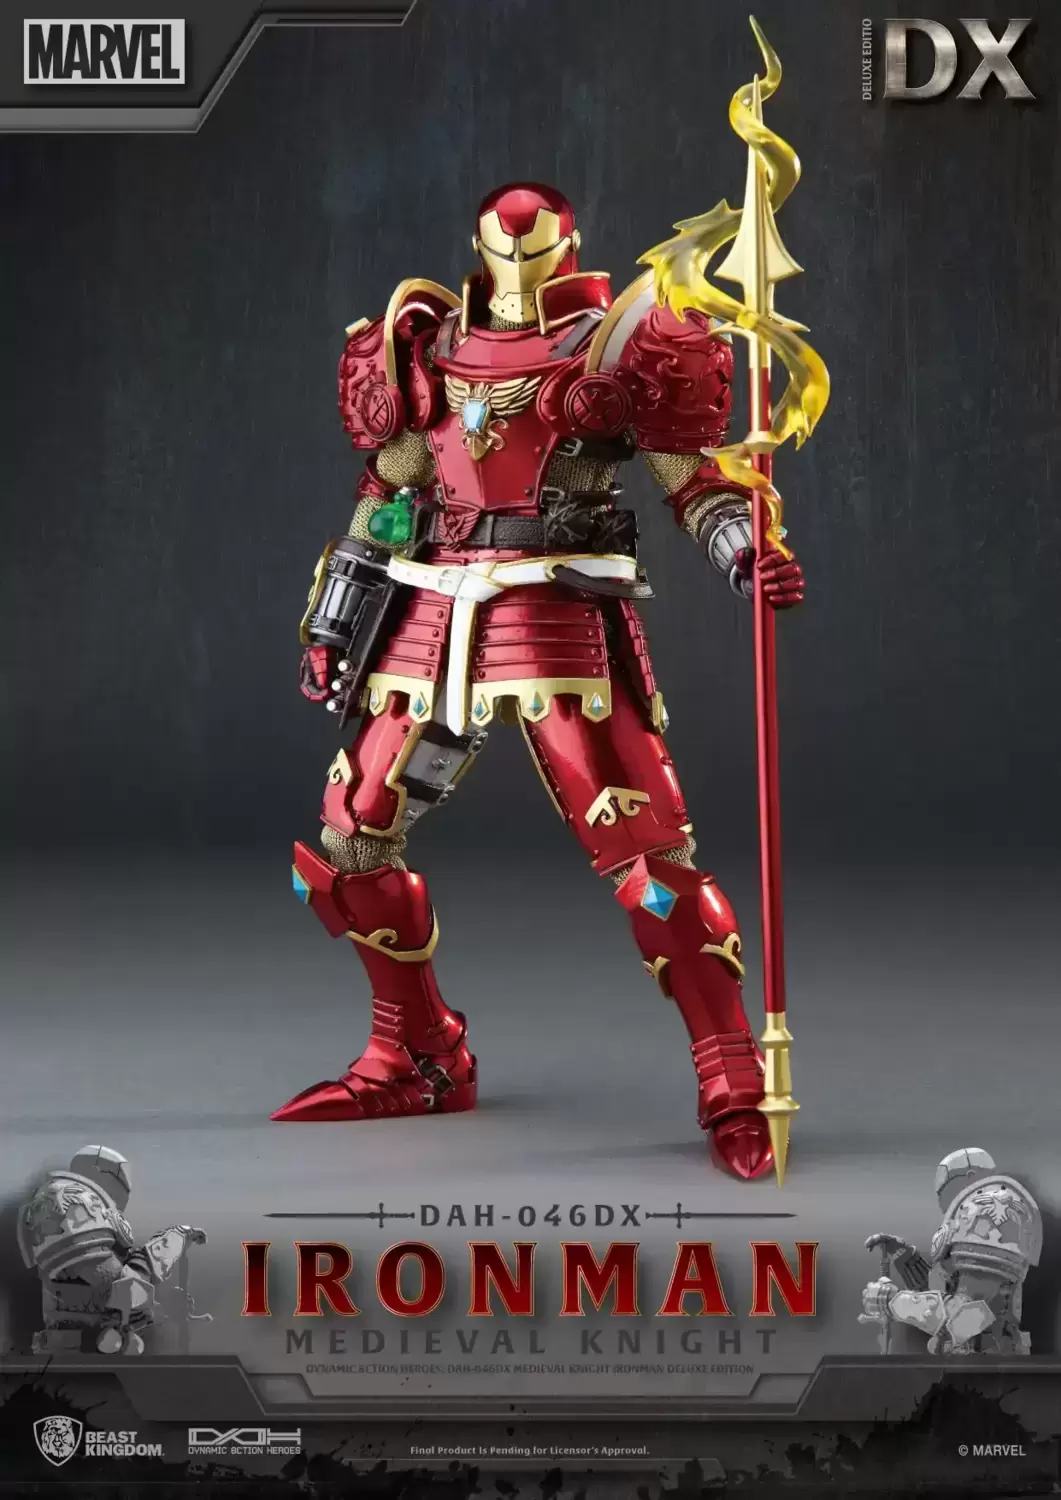 Dynamic 8ction Heroes (DAH) - Medieval Knight - Iron Man Deluxe Version